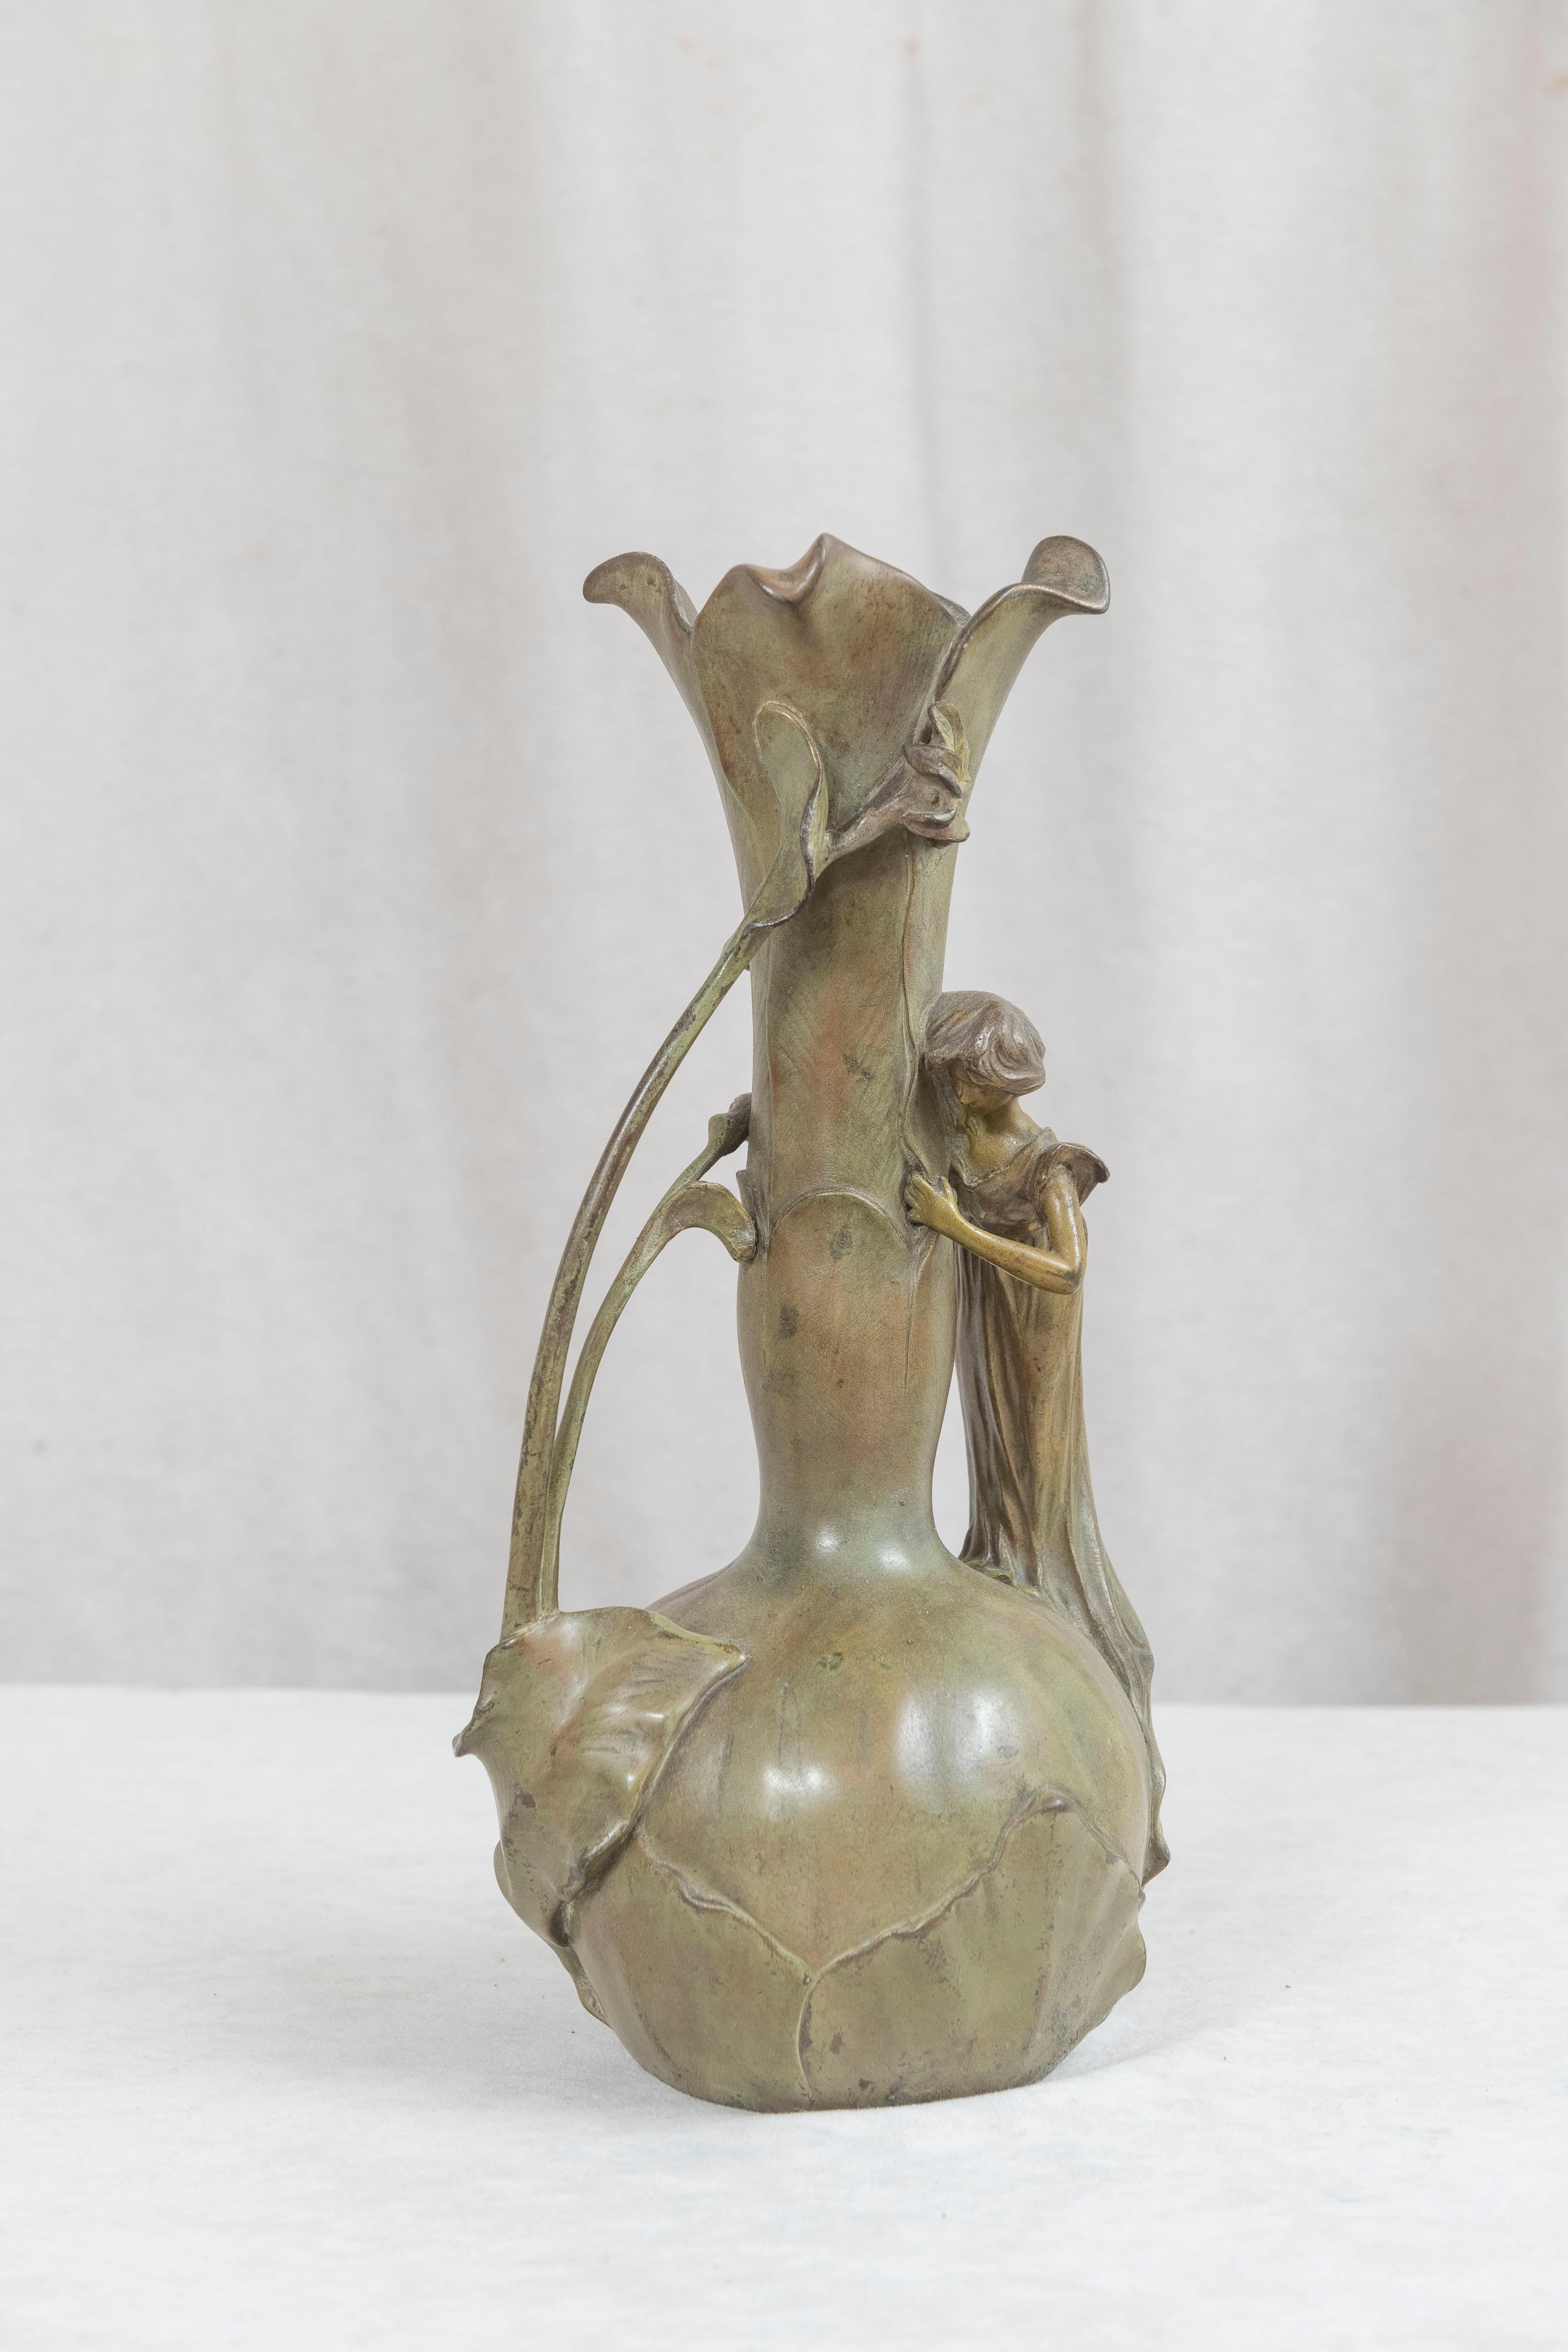 This lovely vase is a very fine example of the art nouveau style, and period. It has all the desirable elements needed to exemplify good art nouveau, sinewy lines, flowers, and the pretty girl embracing the vase. Done in an organic green patina and